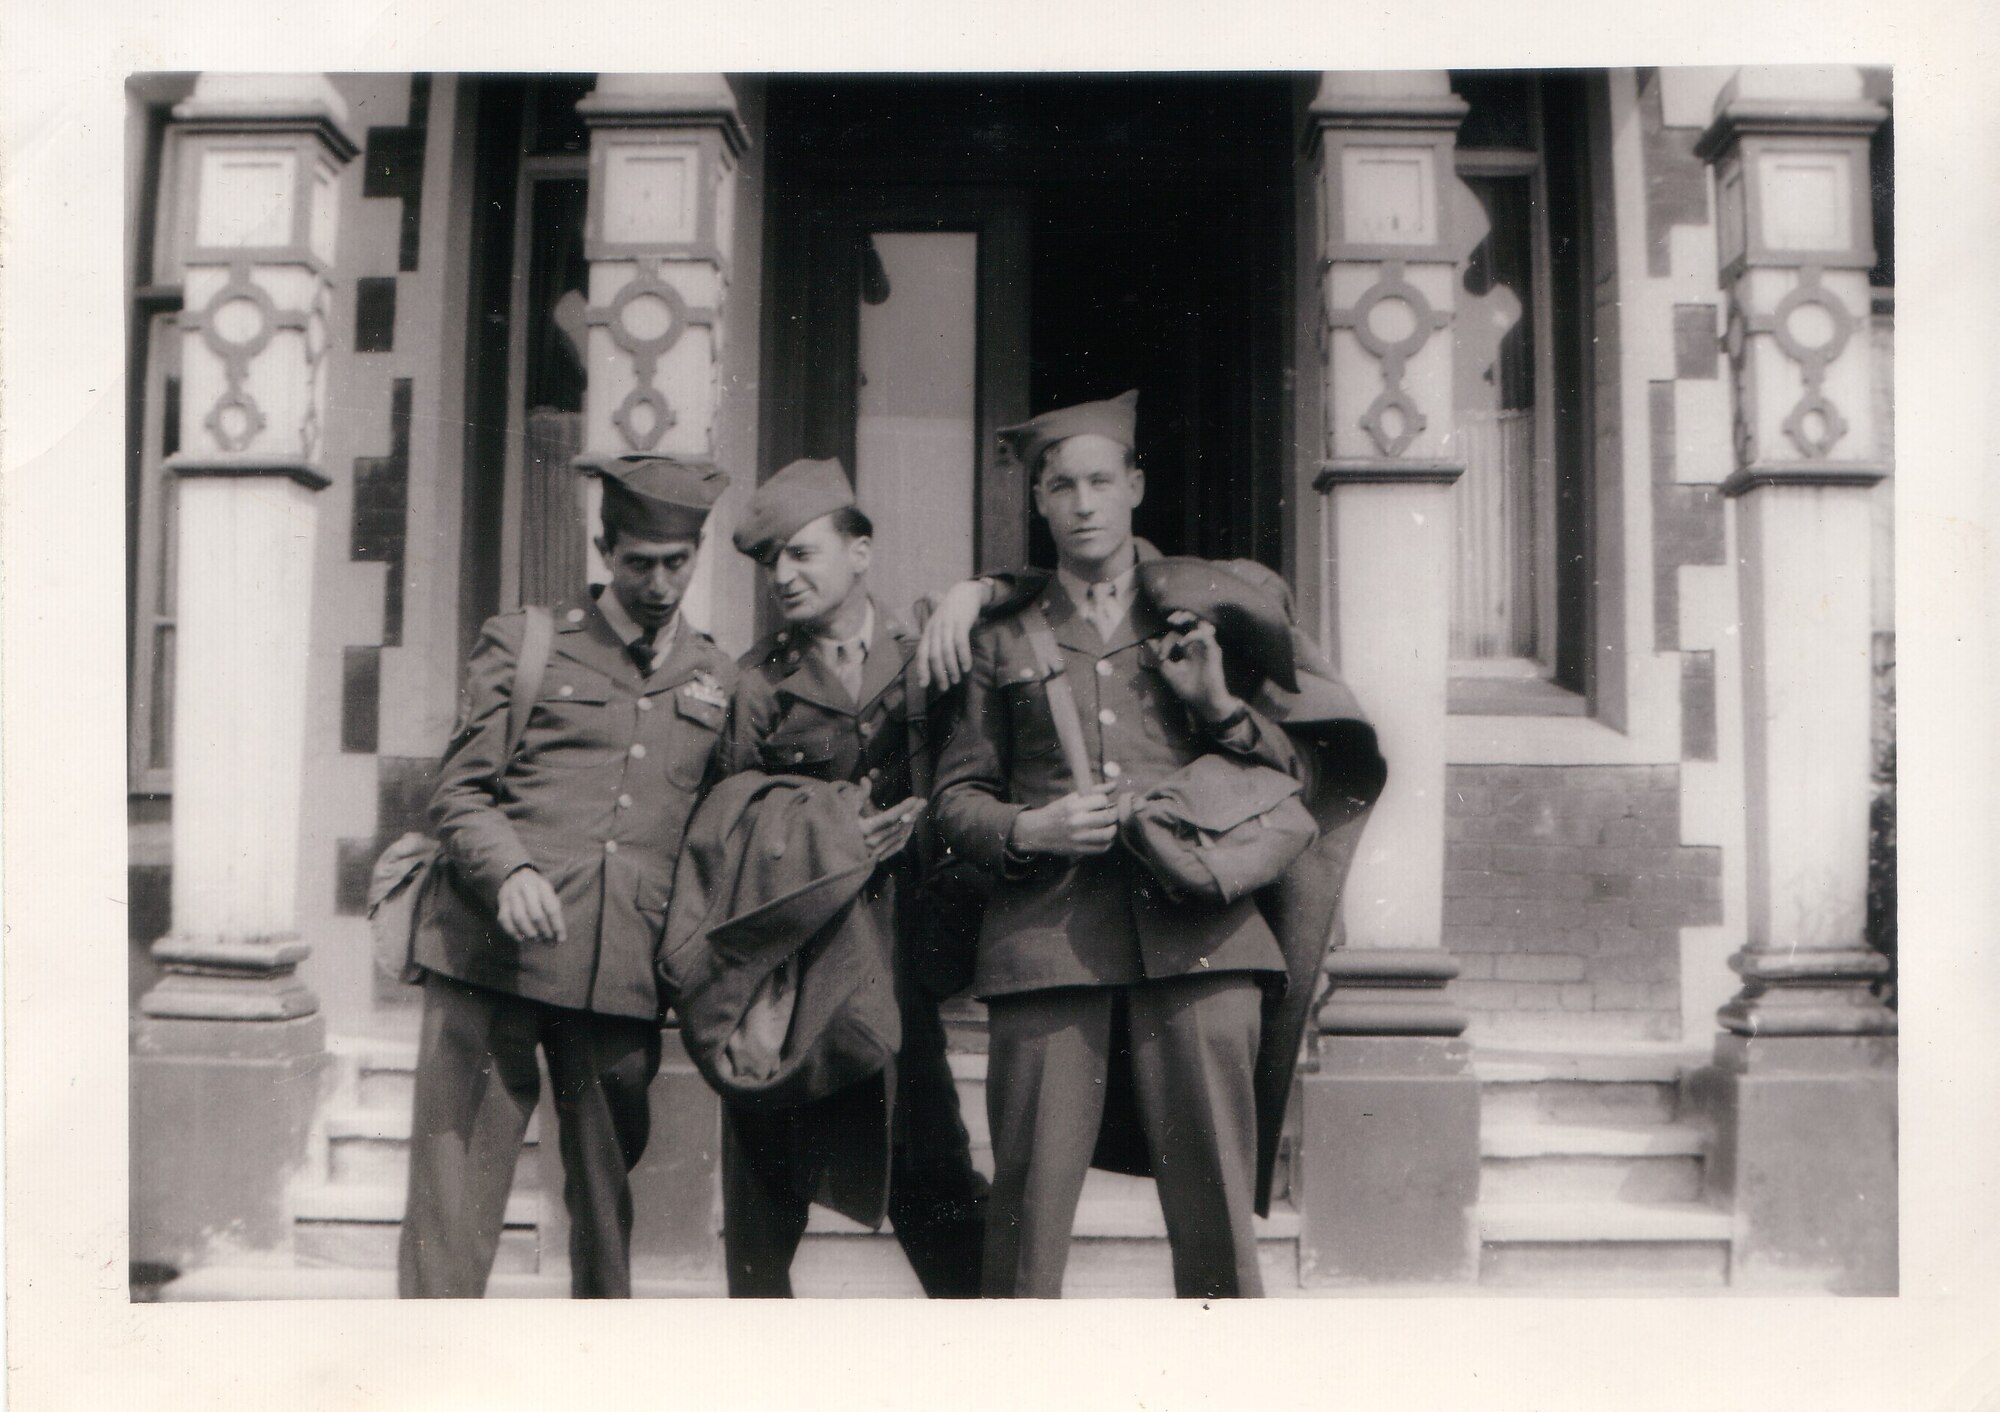 (L to r) SSgt. Froilan Hernandez, TSgt. Jack Duer and SSgt. Floyd Gibson of the 452nd Bombardment Group ham it up outside a pub while on leave in England. The men were part of an aircrew on the B-17 Flying Fortress Shot Snorter, which was shot down over Europe while being fl own by another crew. (Photo by Pleon Wood)